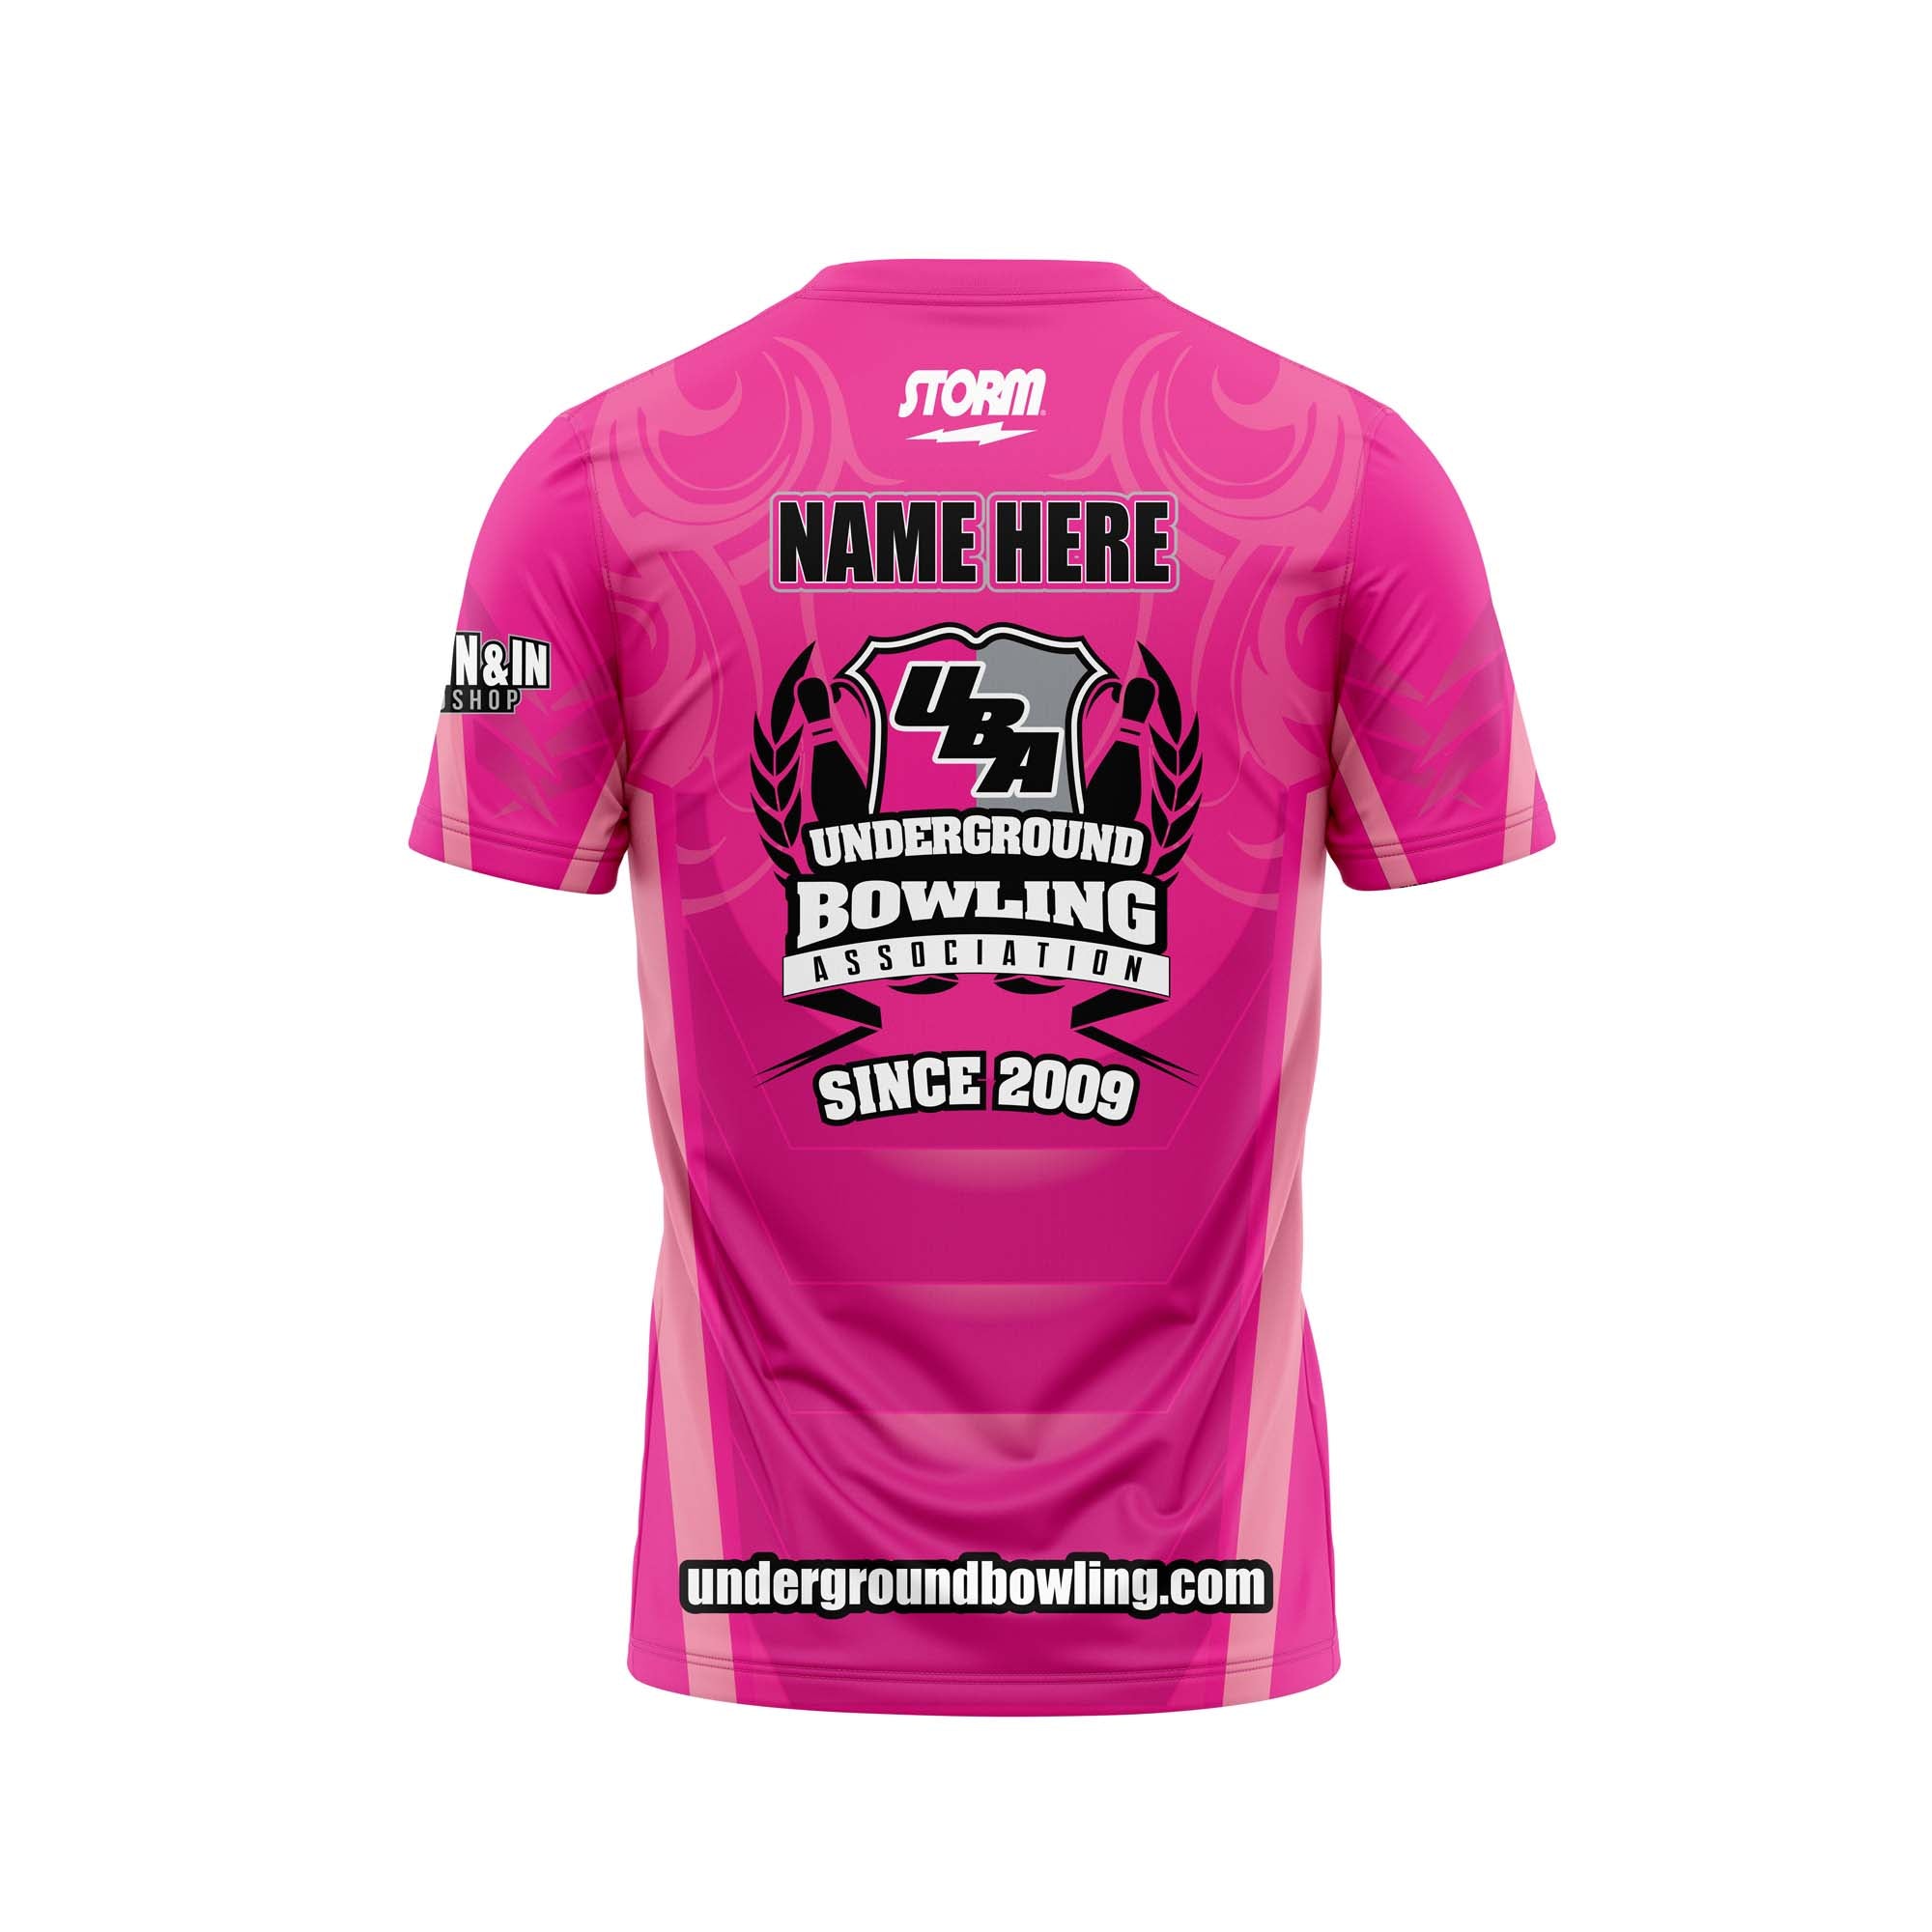 Infamous Breast Cancer Jersey